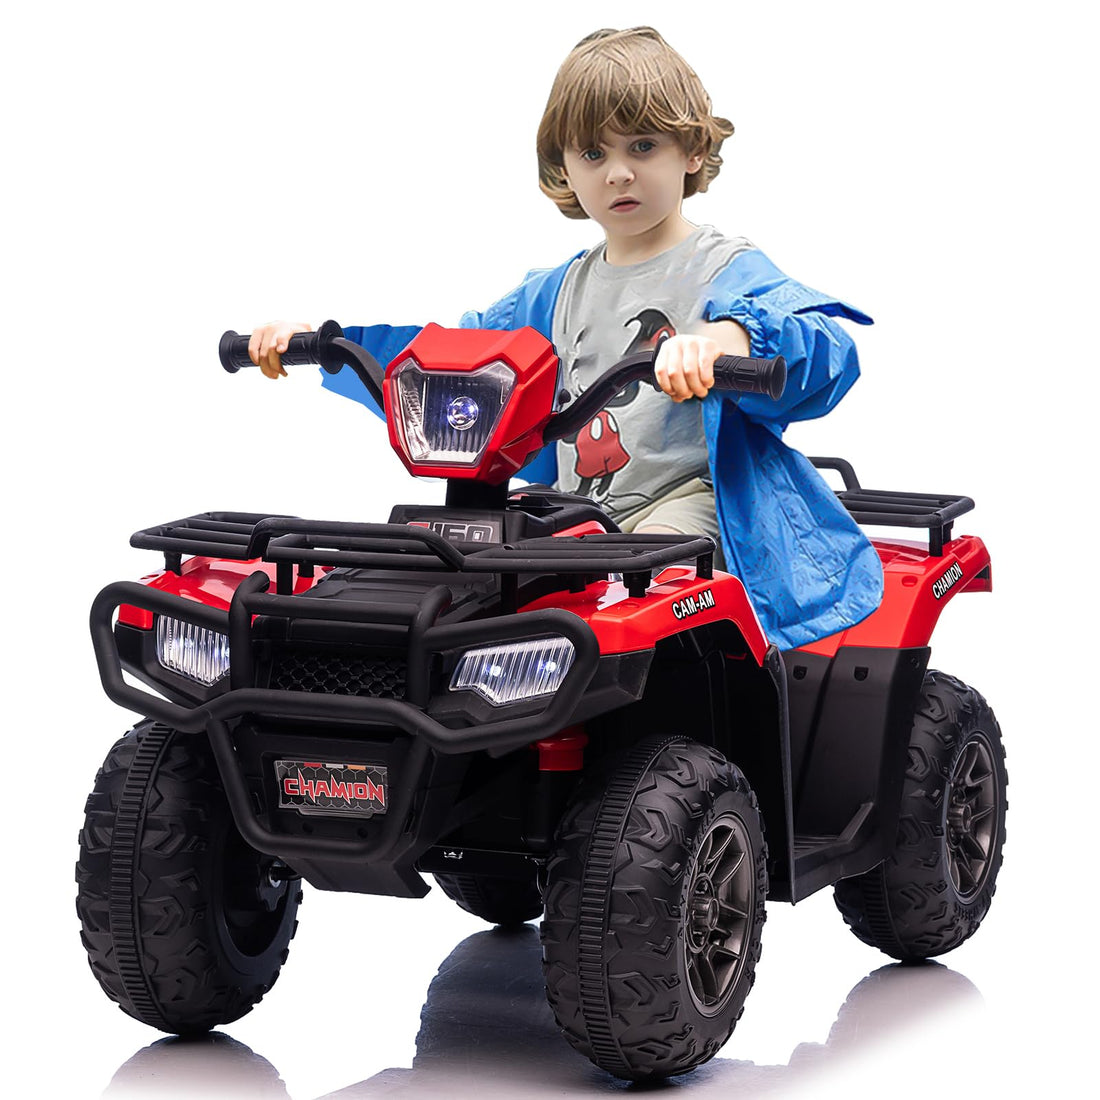 12V Ride on ATV for Kids, Electric Vehicle for Toddlers,High/Low 2.2mph Safety Speed for Child, Forward/Backward,LED Light, Music,USB for Boys Girls Gift,Red